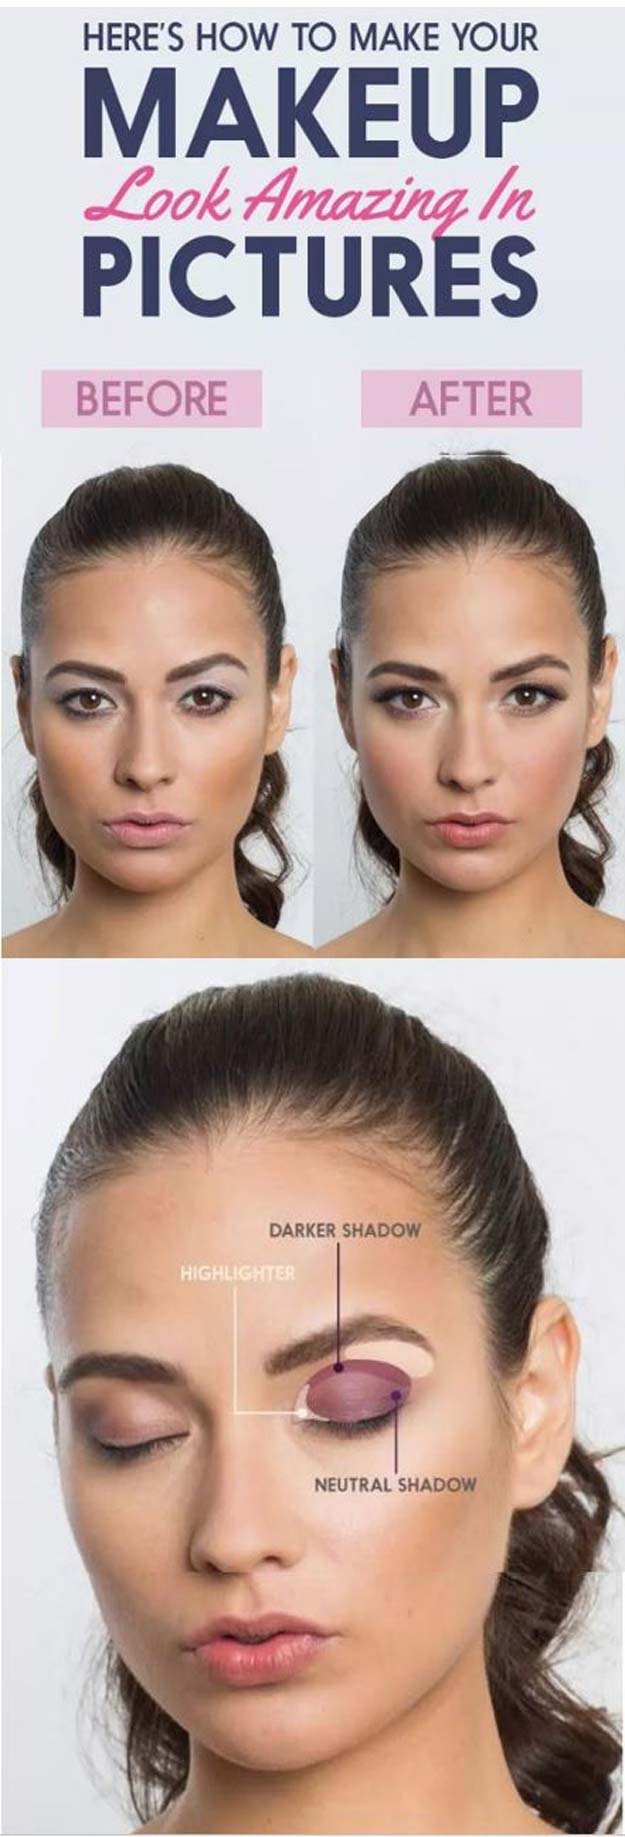 makeup-tips-for-photos-heres-how-to-do-your-makeup-so-it-looks-incredible-in-pictures